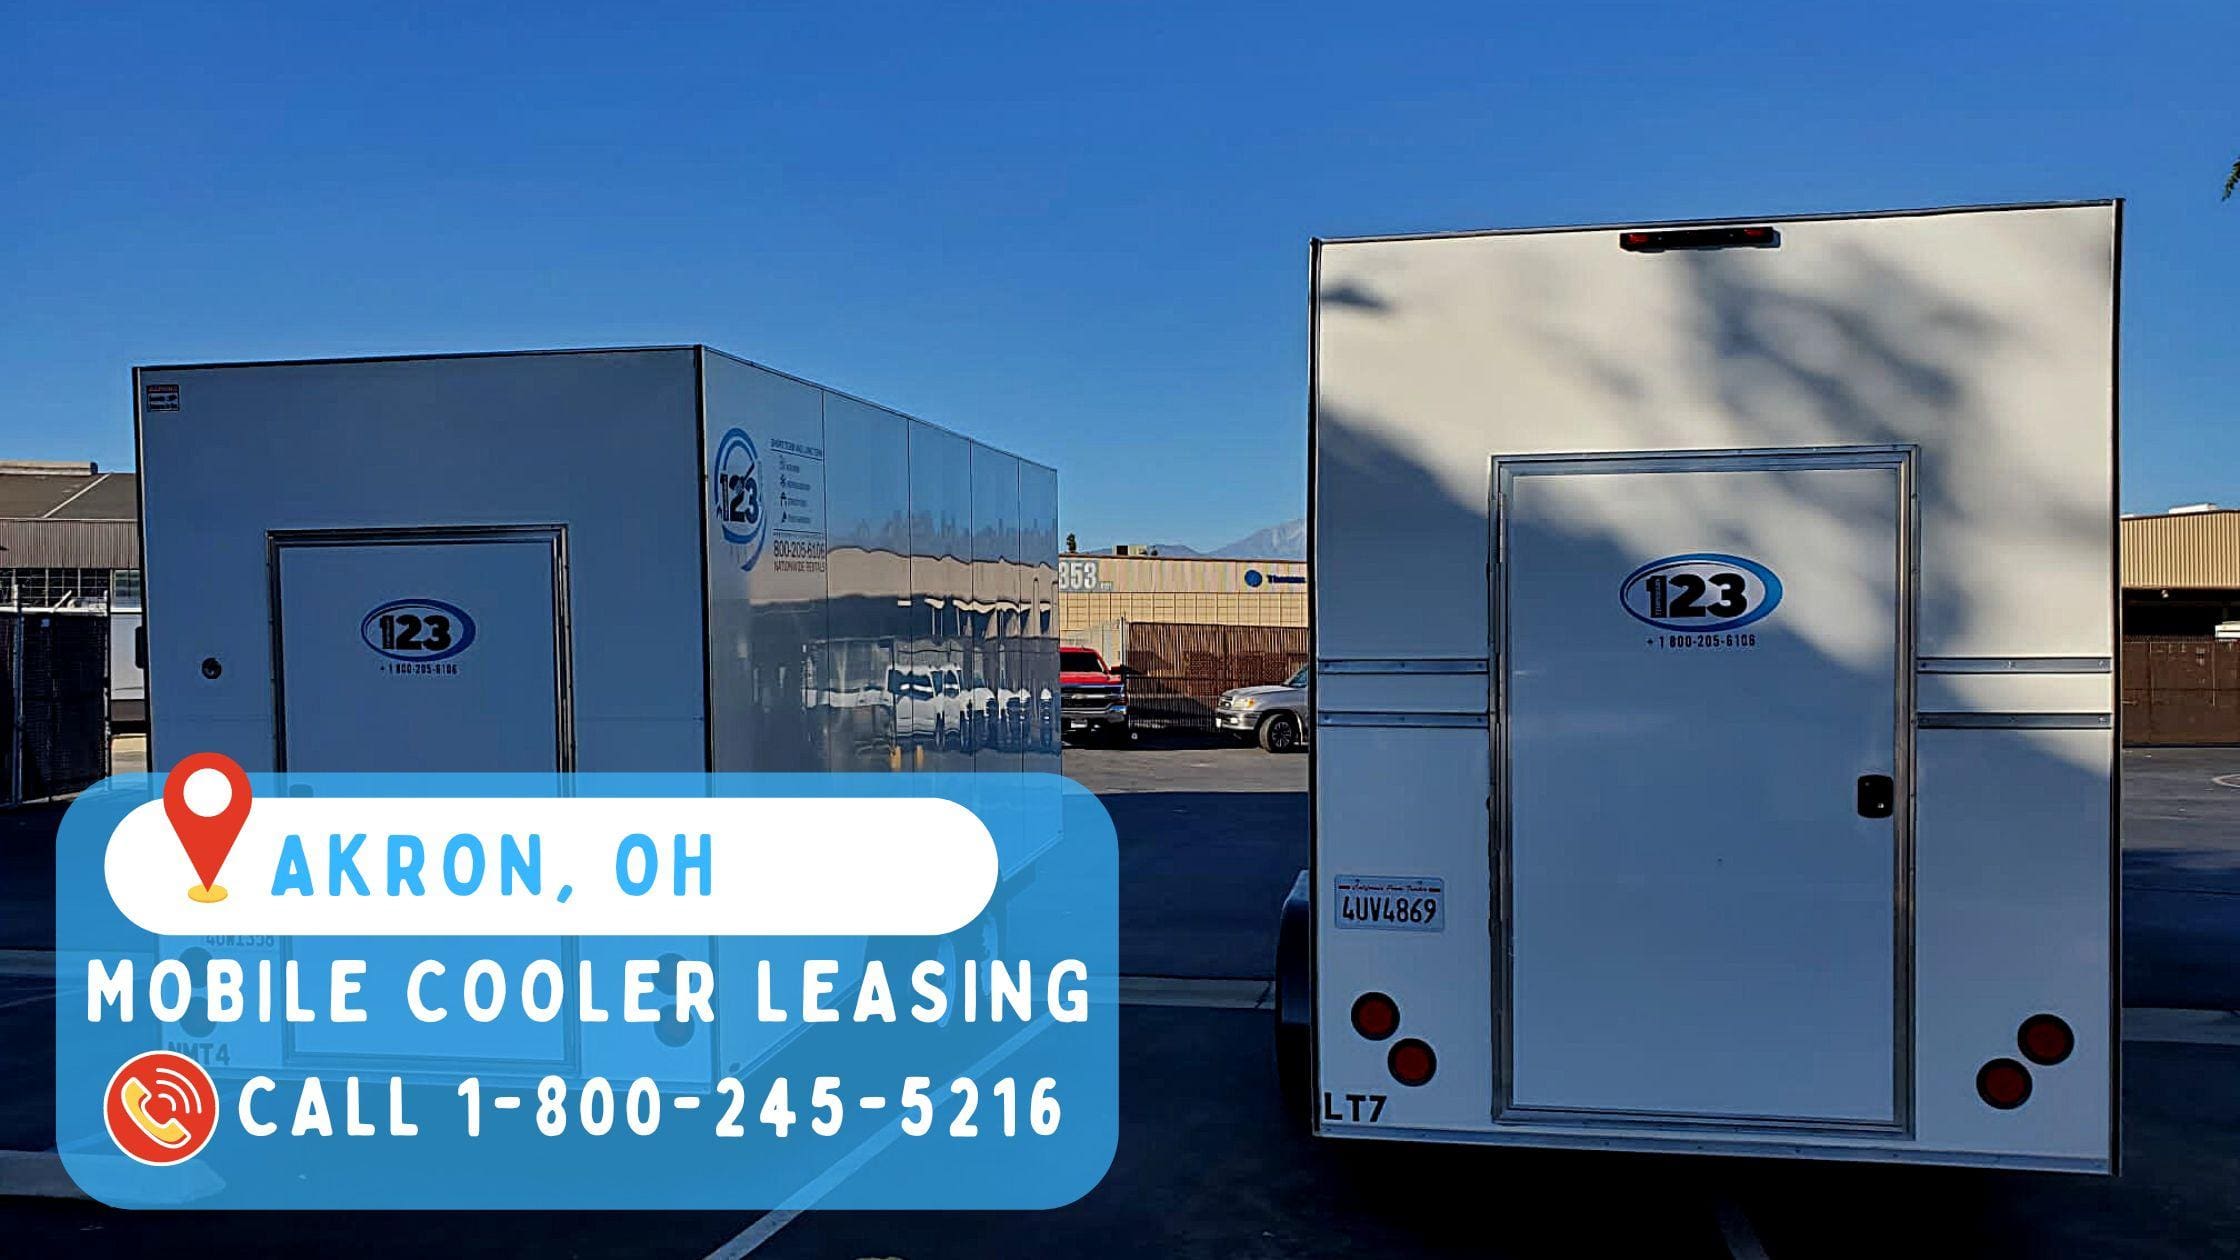 Mobile Cooler Leasing in Akron, OH